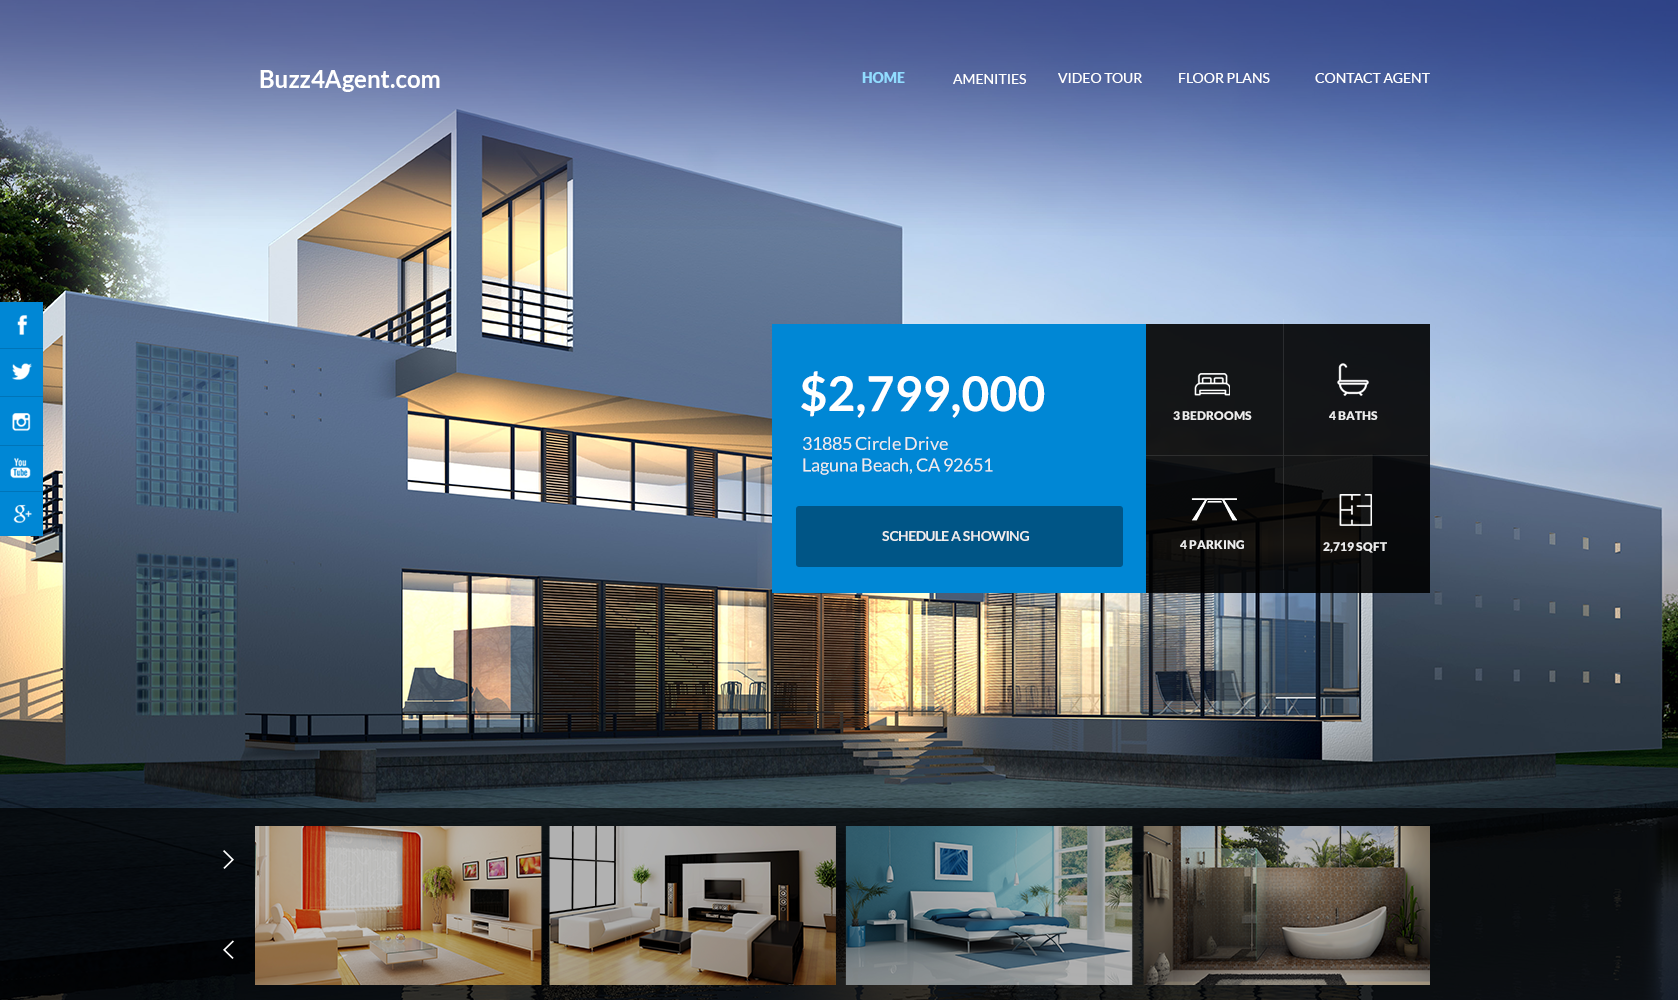 How to Create a Real Estate Website like Zillow